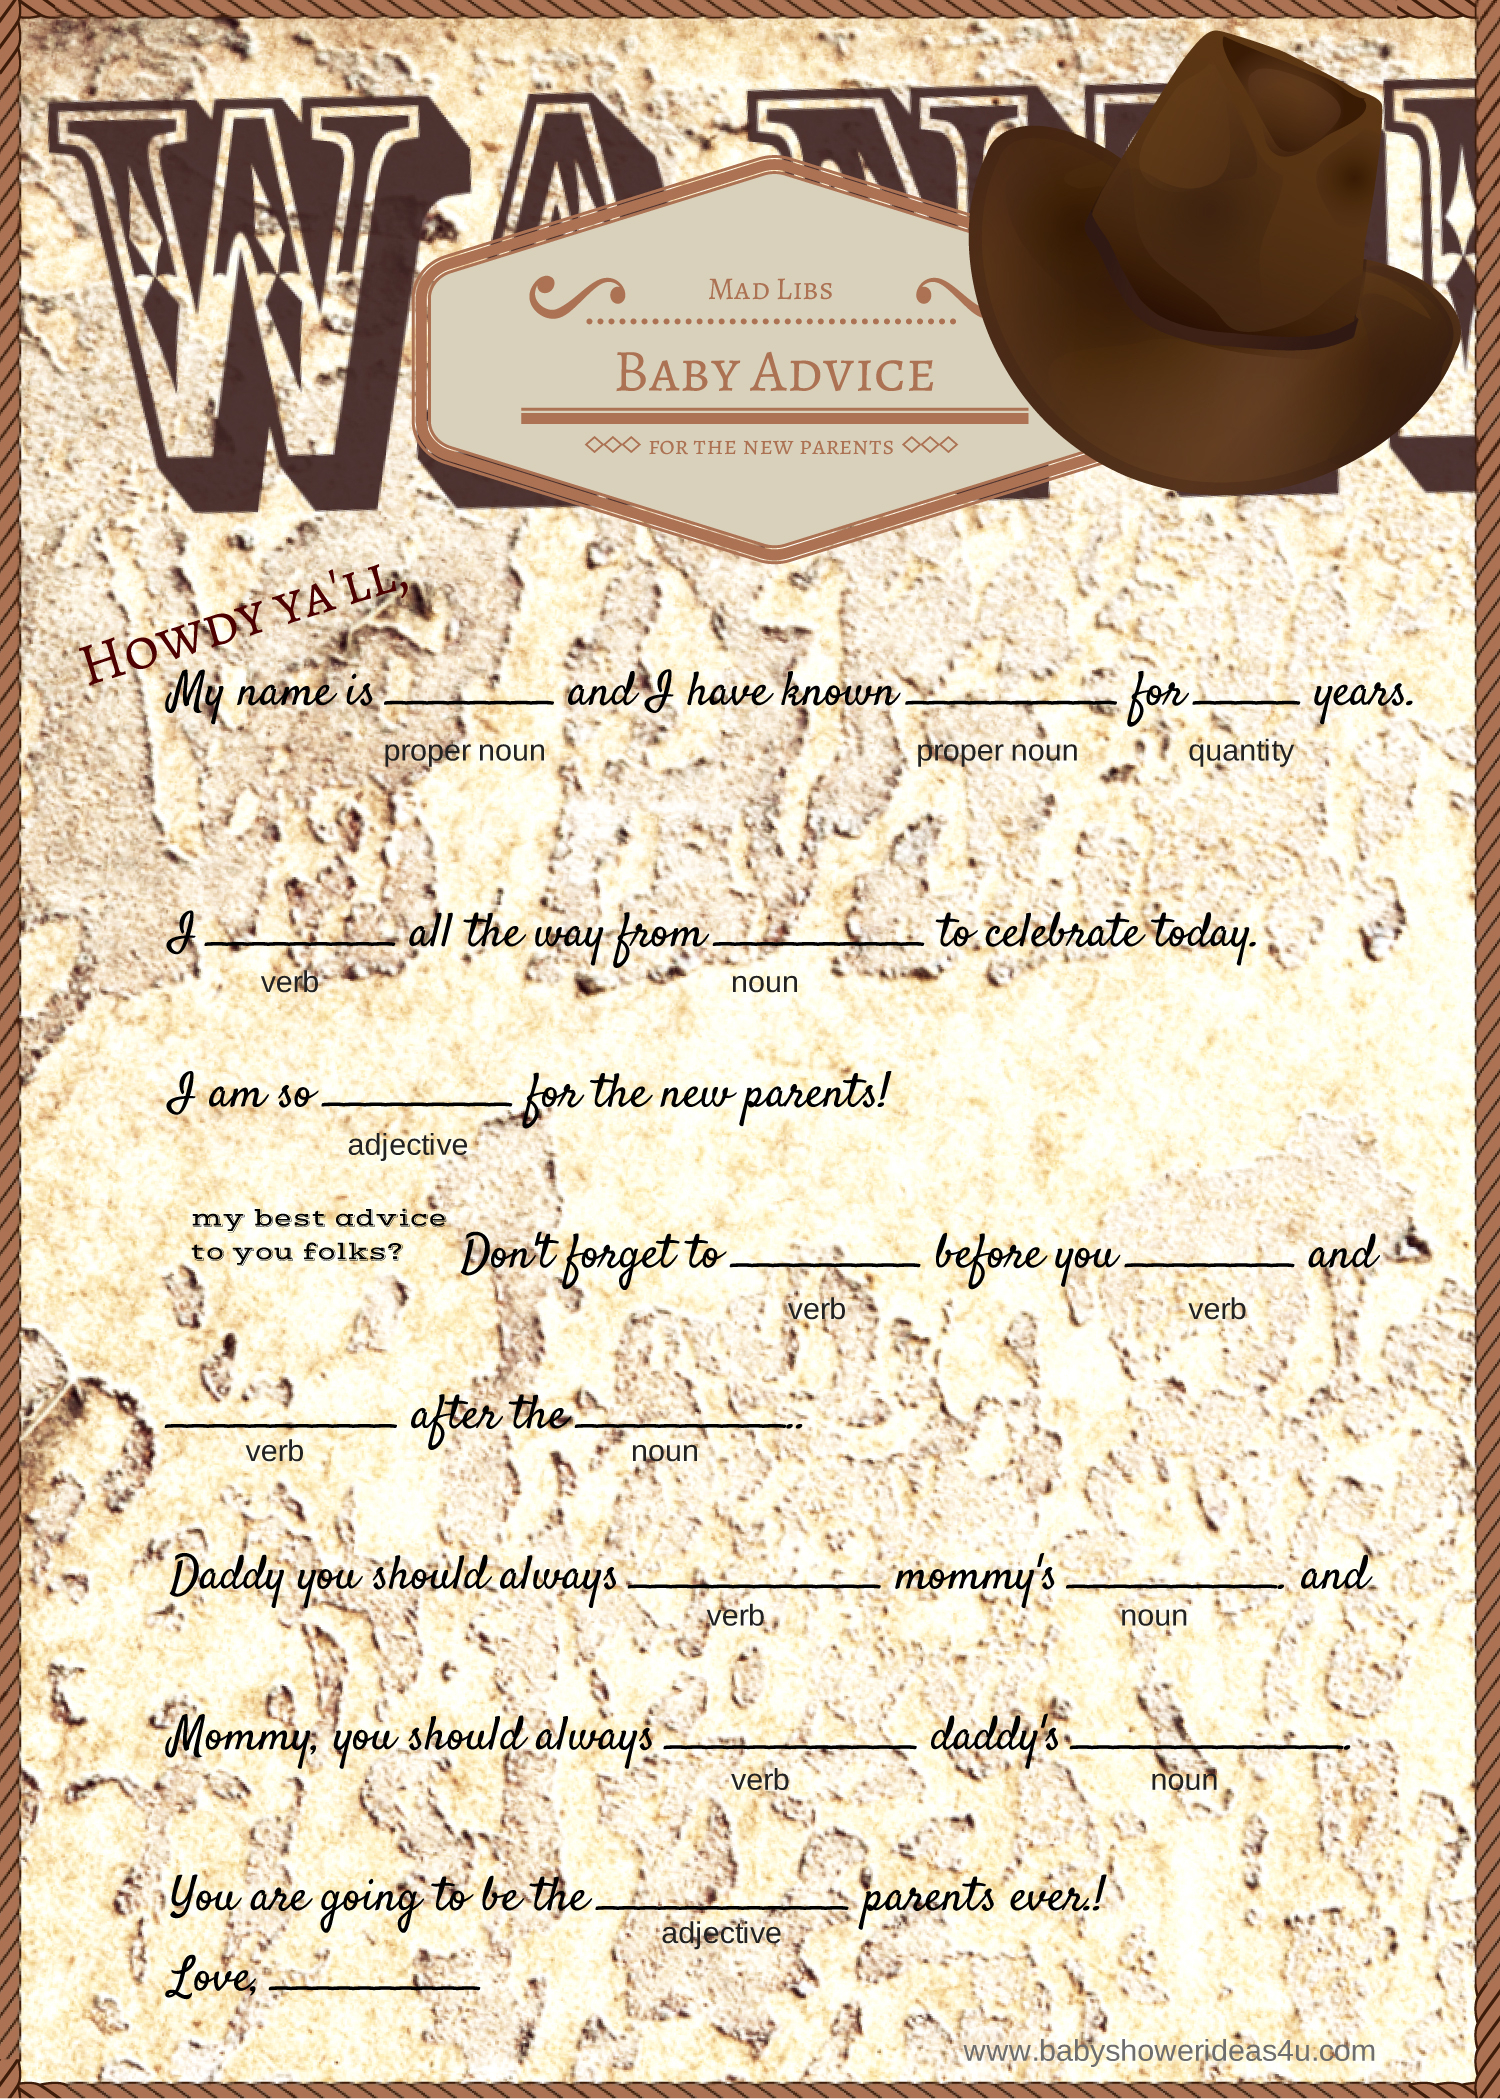 Free Baby Shower Mad Libs Game Cowboy Baby Shower Ideas 